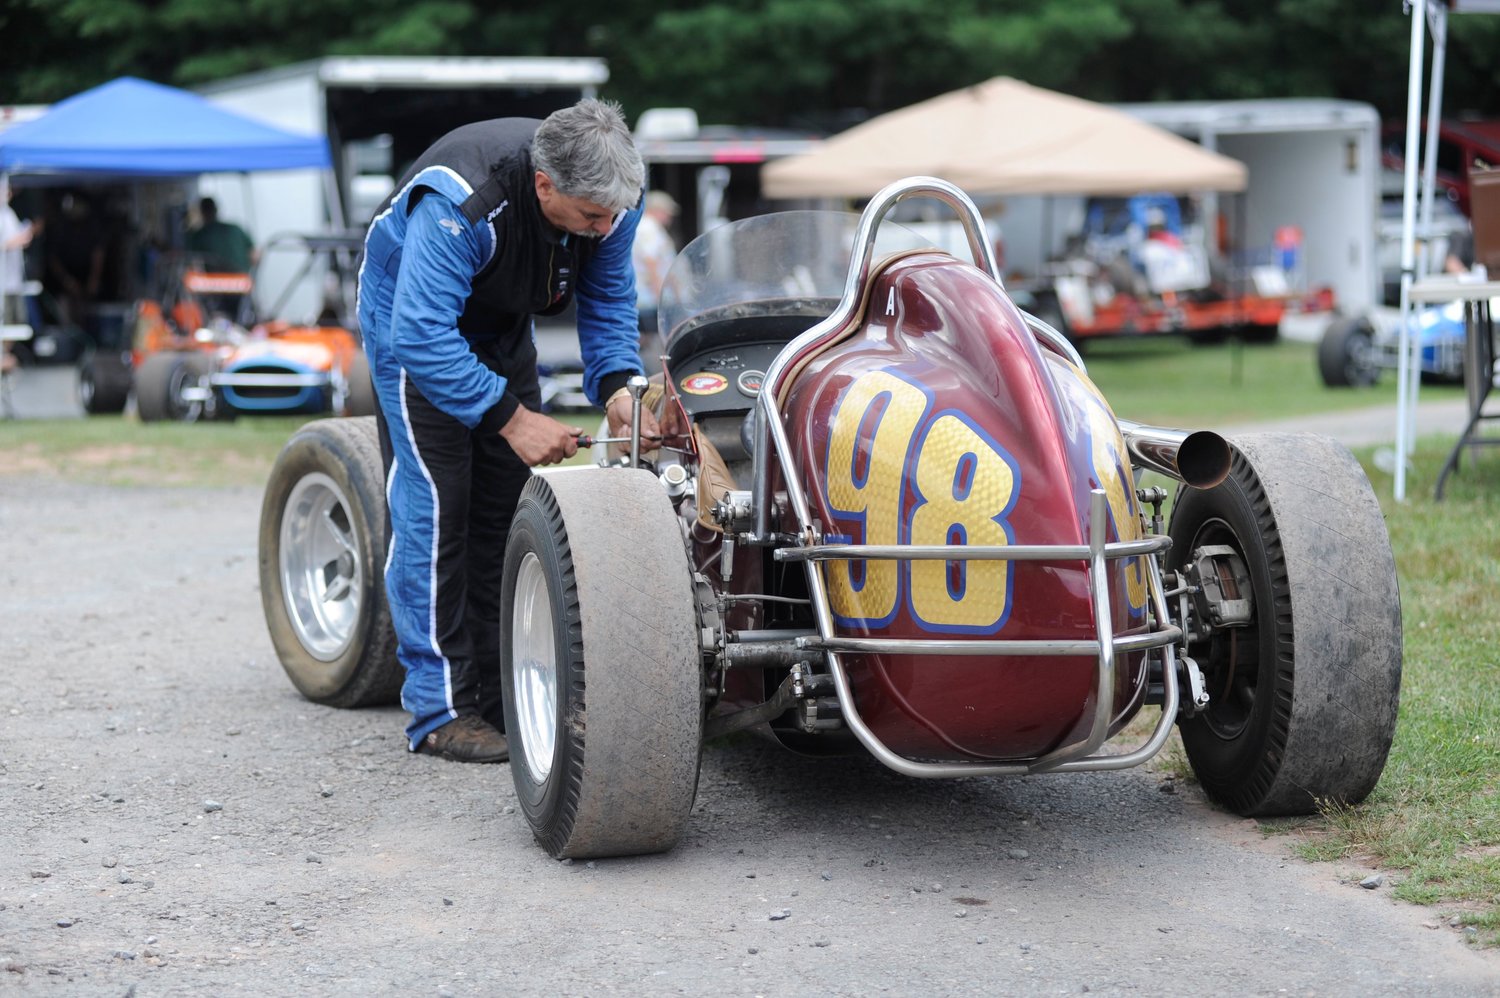 Last-minute adjustments. Keith Majka fine-tunes the carbs on his Offy-powered race car before taking to the asphalt.